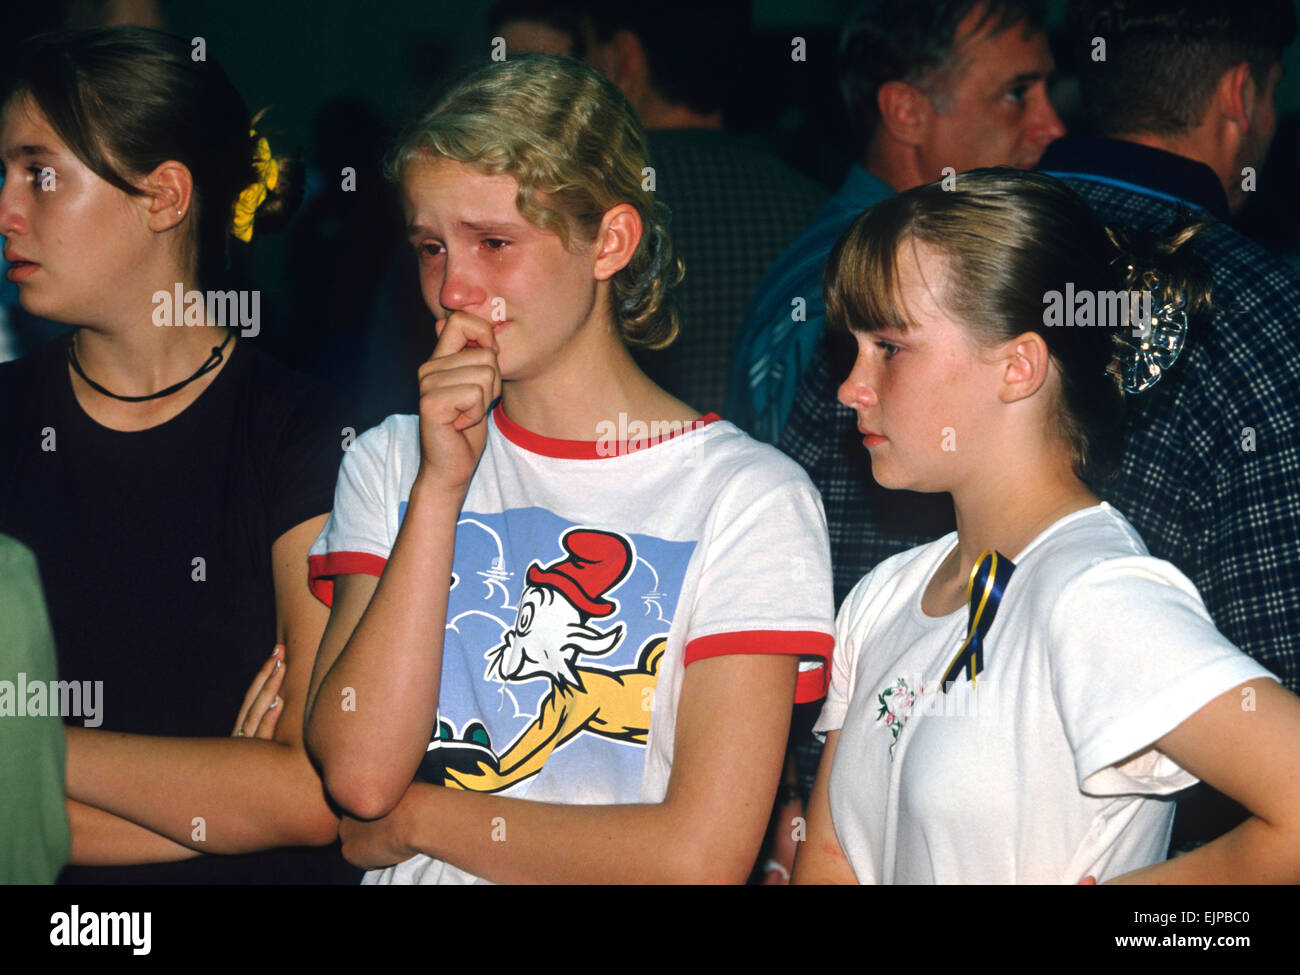 Students mourn their friends killed aboard TWA Airlines Flight 800 at a memorial service July 18, 1996 in Montoursville, PA. TWA Flight 800 exploded off East Moriches, NY with the loss of 230 lives including 21 students from the town. Stock Photo